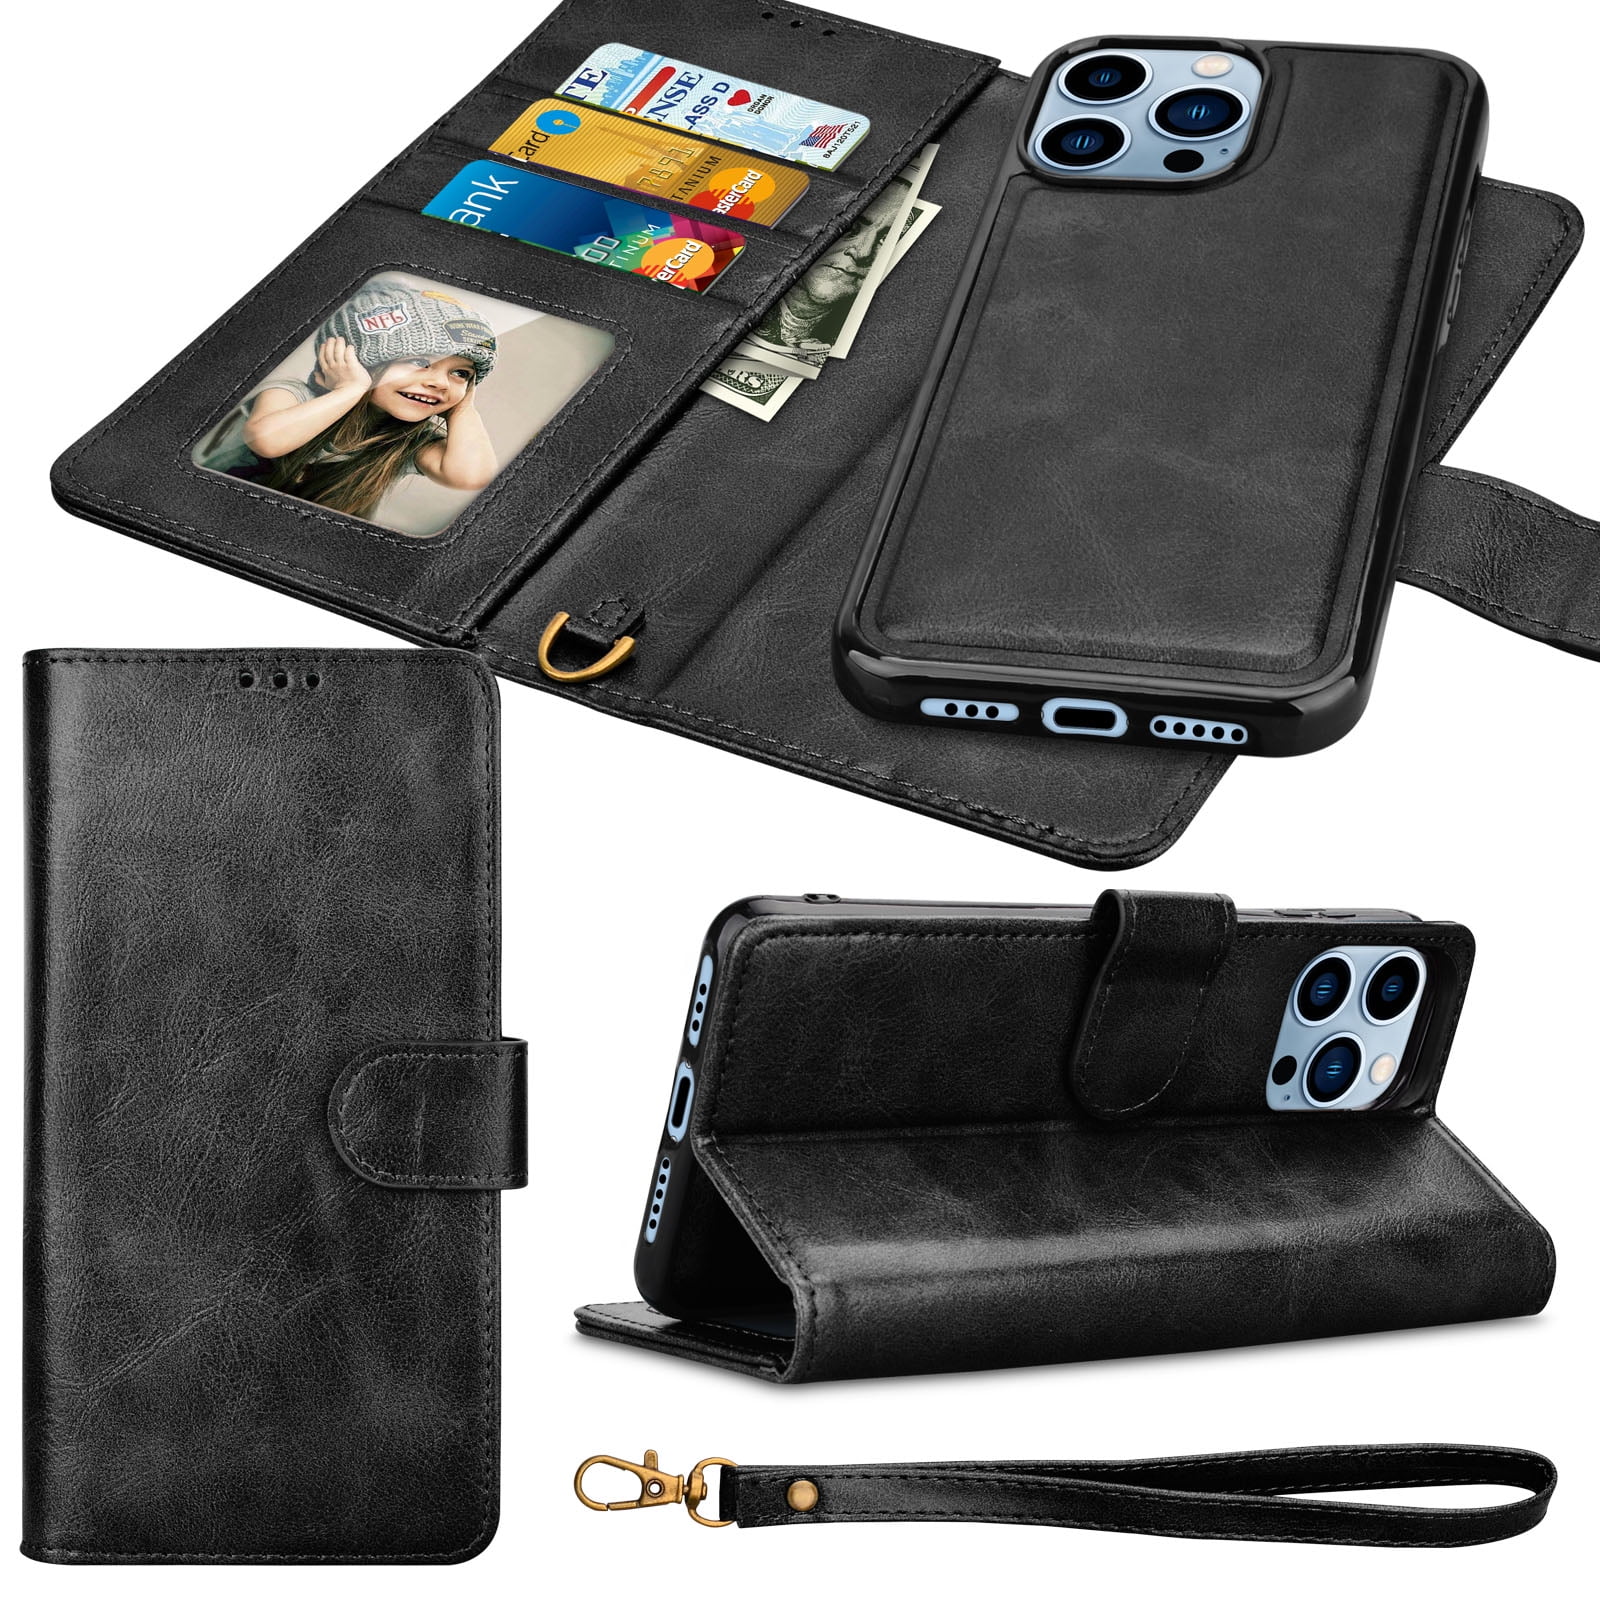 Huawei P smart Wallet Case Schwarz GOGME Premium PU Leather Wallet Cover with Magnetic Closure and Card Slots 